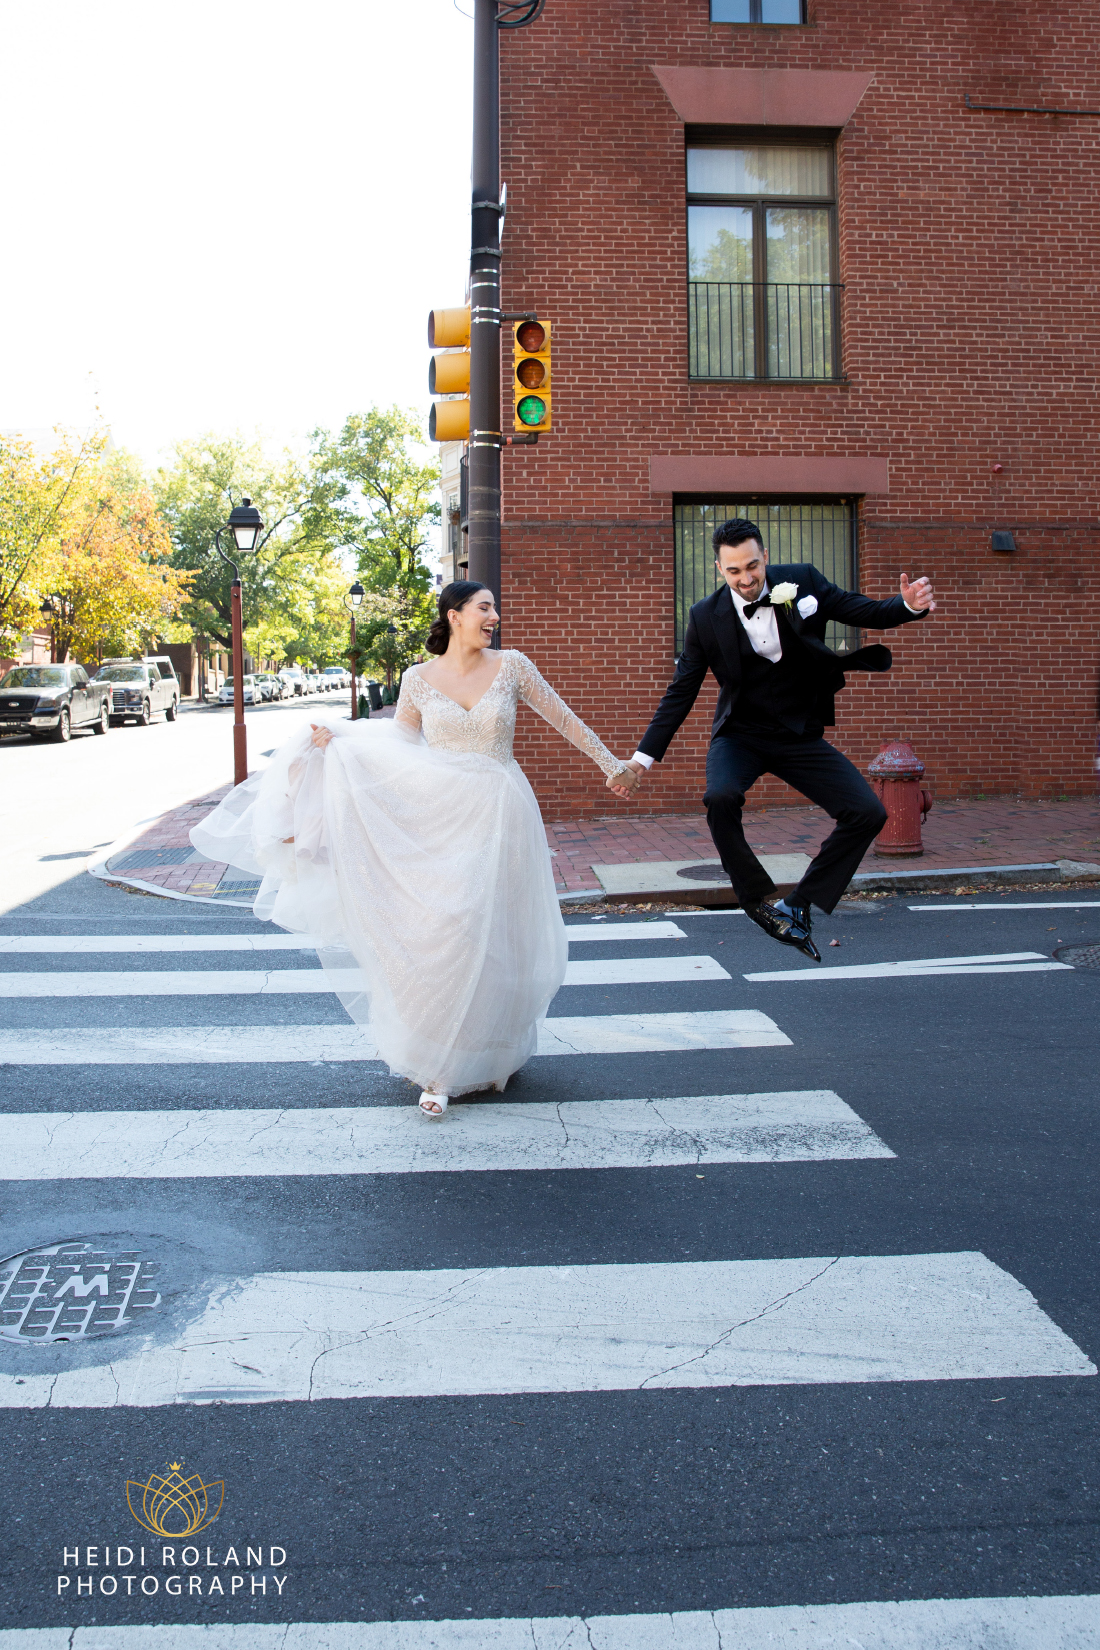 Groom clicking his heels together with excitement while crossing the street with the bride in Philadelphia